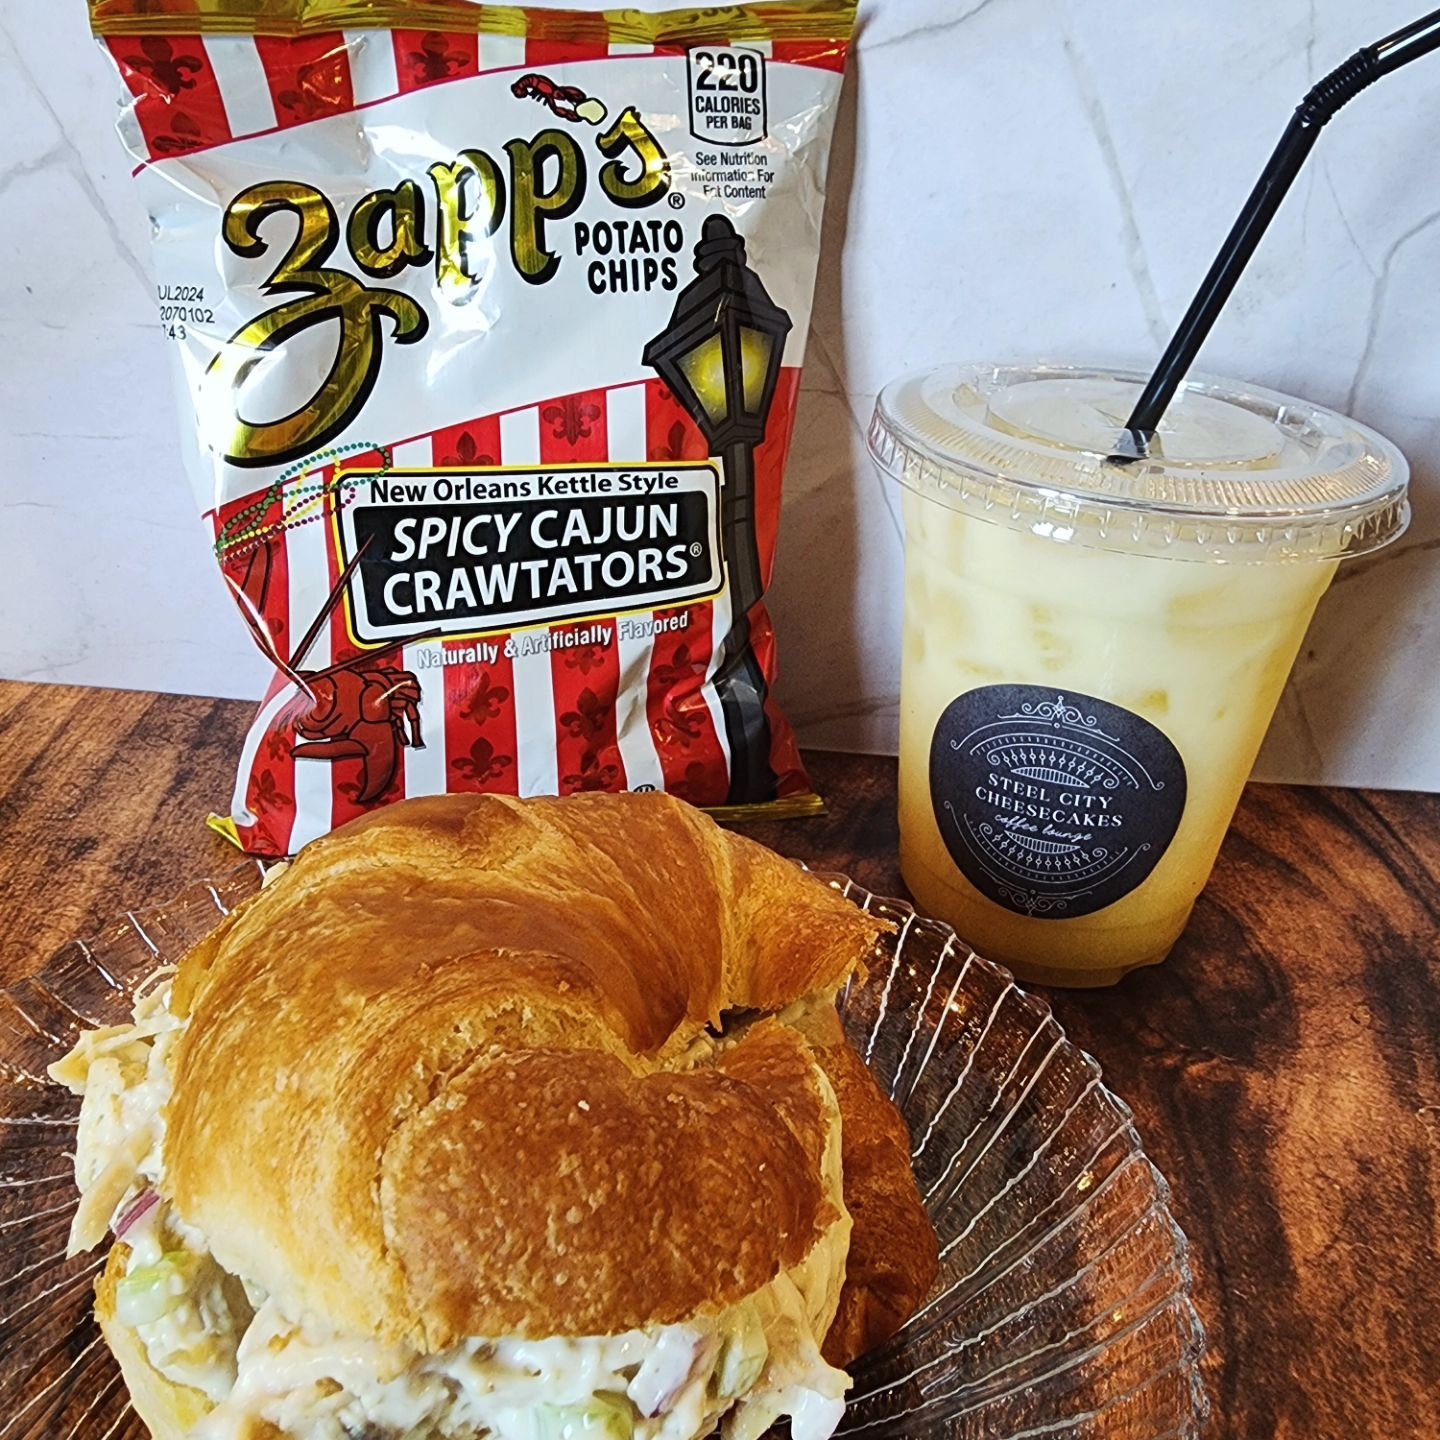 Late lunch or early dinner? We have chicken salad sammies!
Fresh cinnis for dessert (or breakfast tomorrow).

This warmer weather has us feeling summer-y so we made you a ☀️ NEW ☀️ drink
A Pi&ntilde;a colada fresher 🥥🍍
Mocktail or Cocktail, whateve